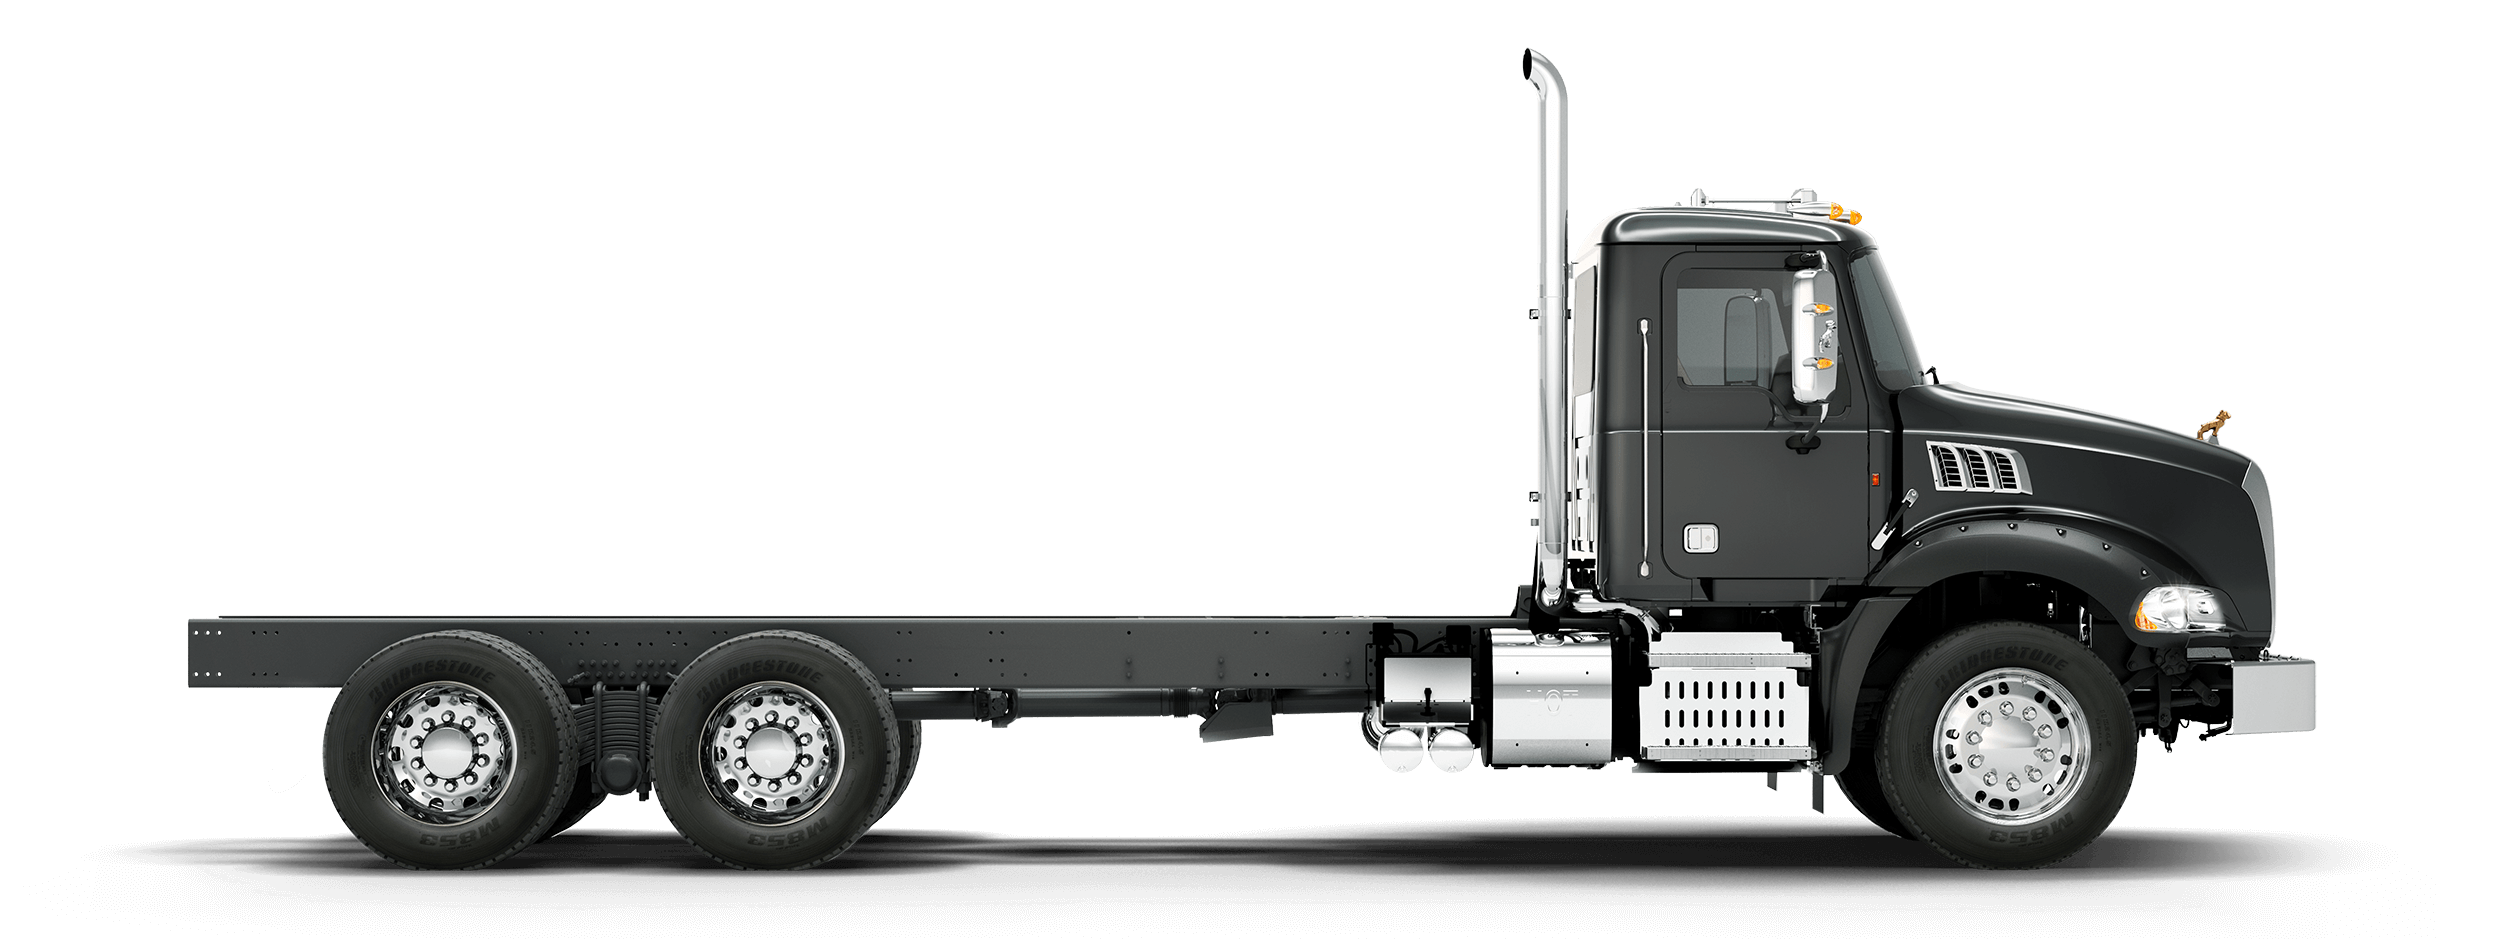 Pickup Truck PNG Picture